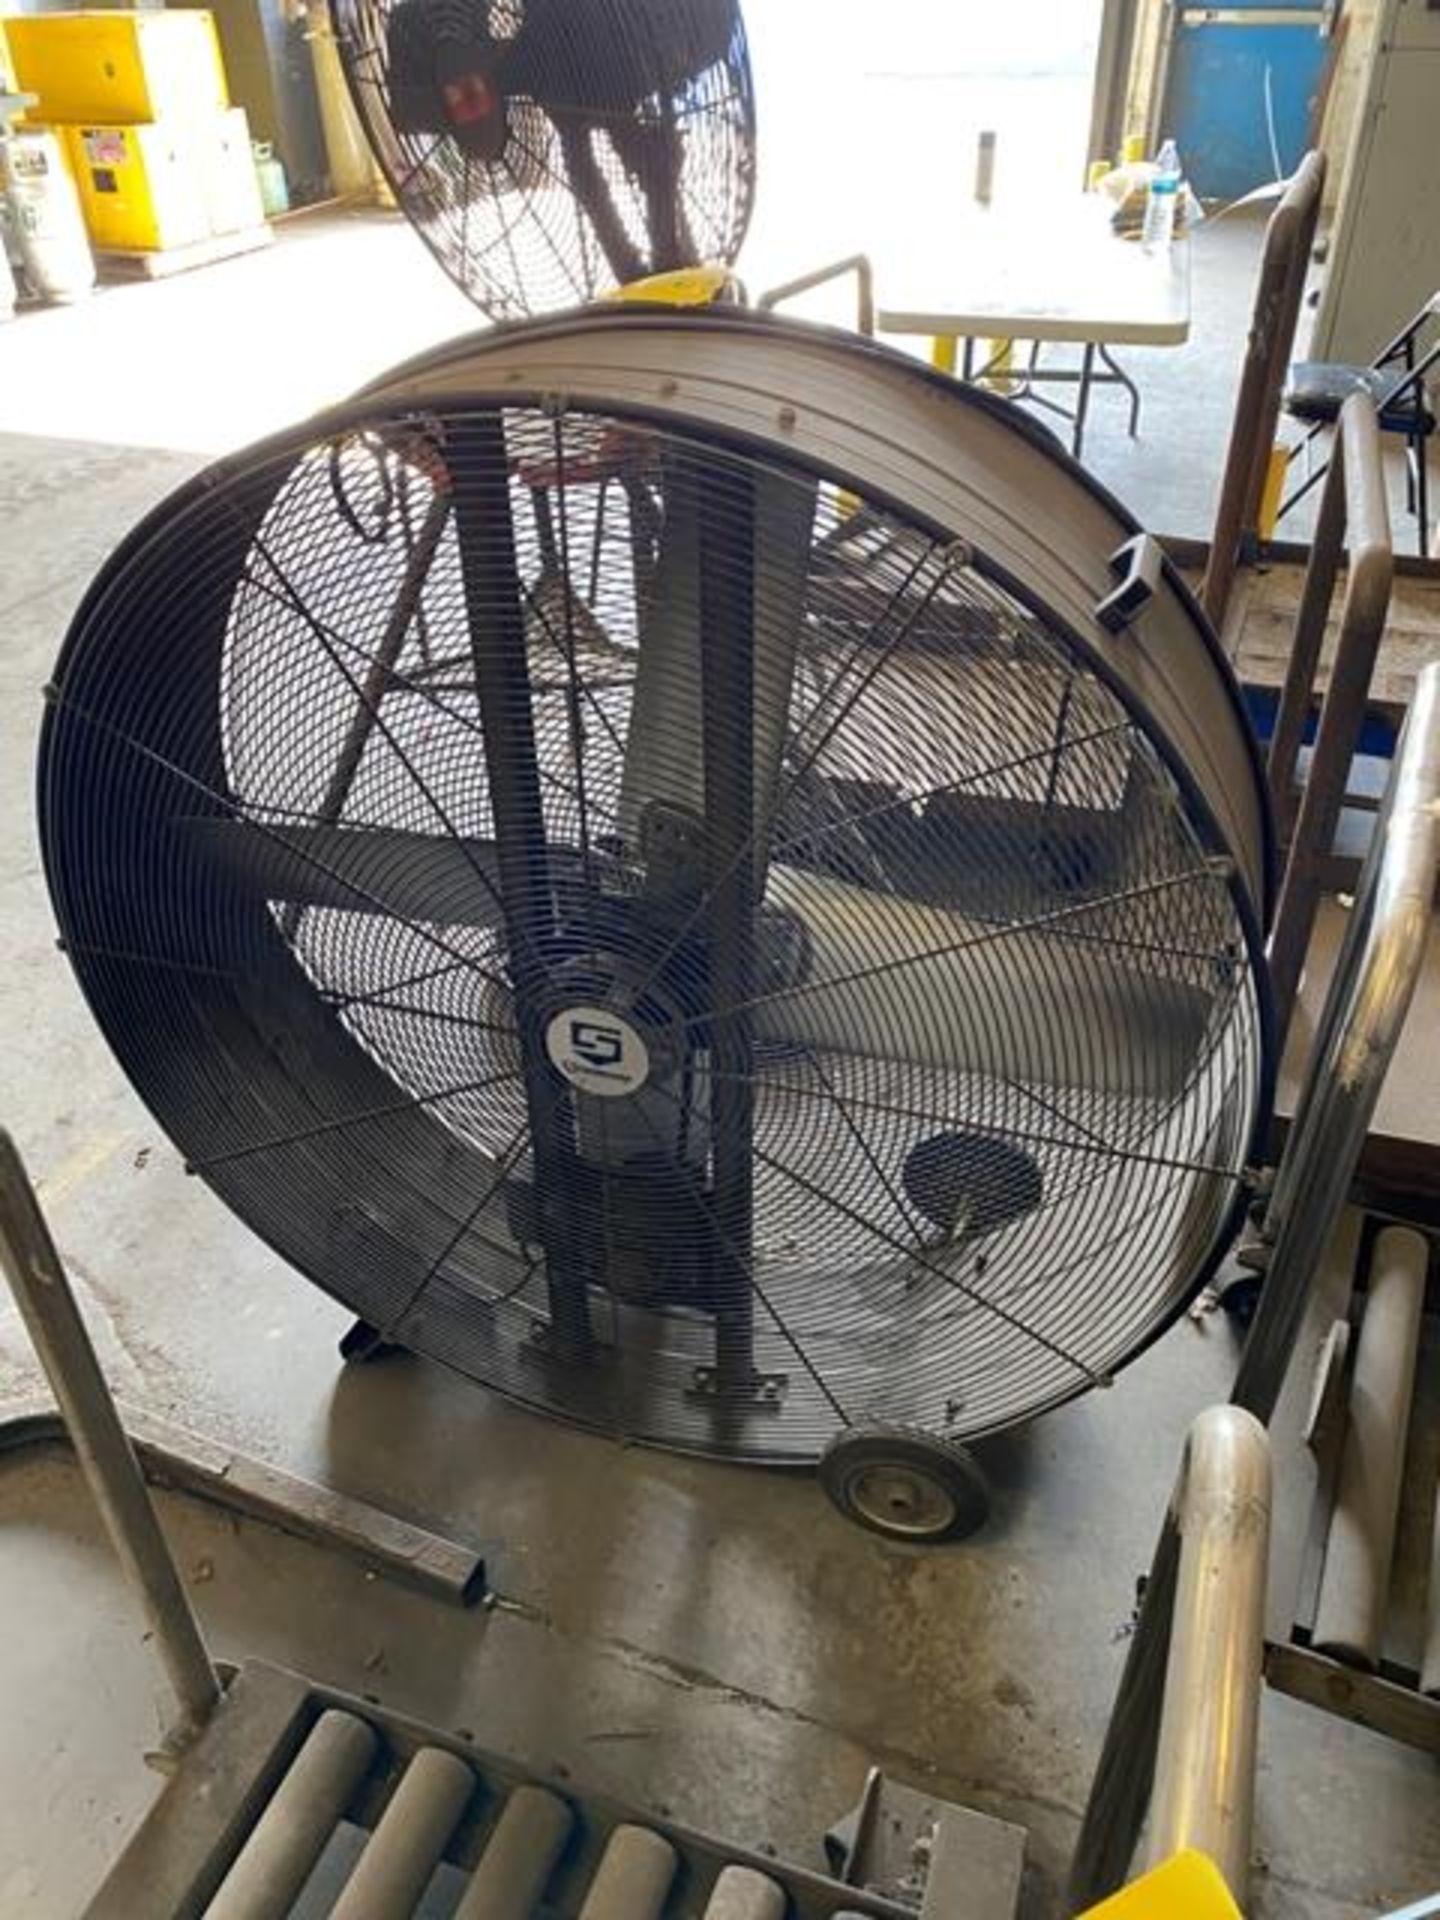 Strongway Shop Fan Rigging Price $25 - Image 2 of 2